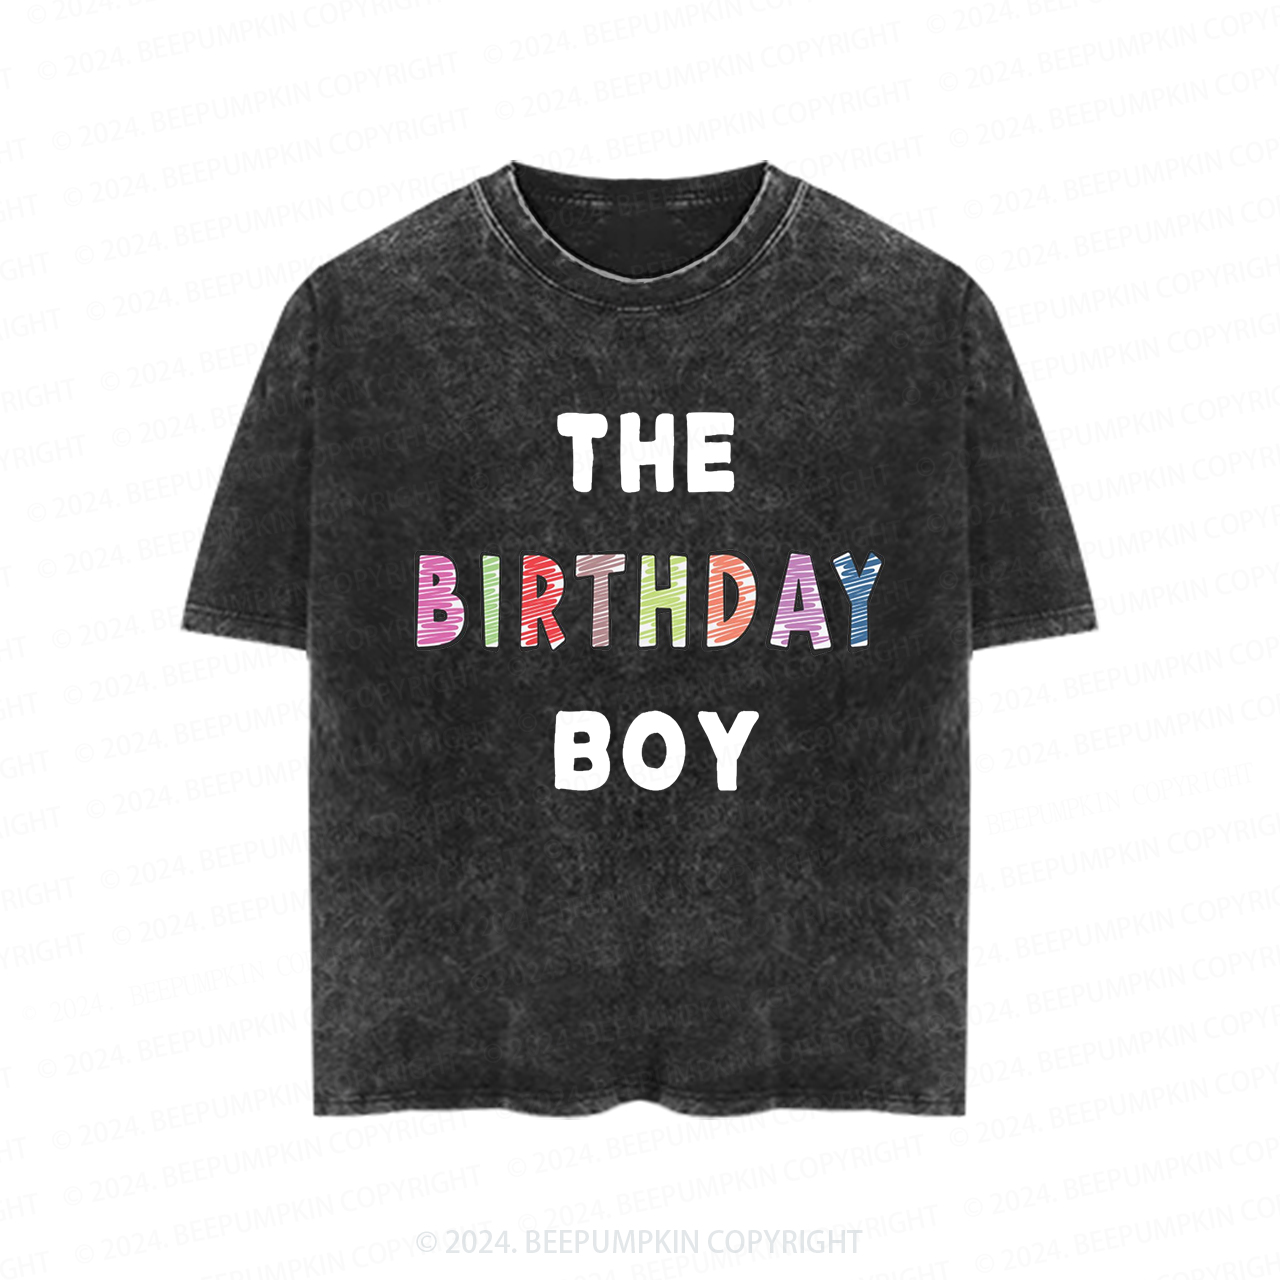 The Birthday Boy And Girl Toddler&Kids Washed Tees         